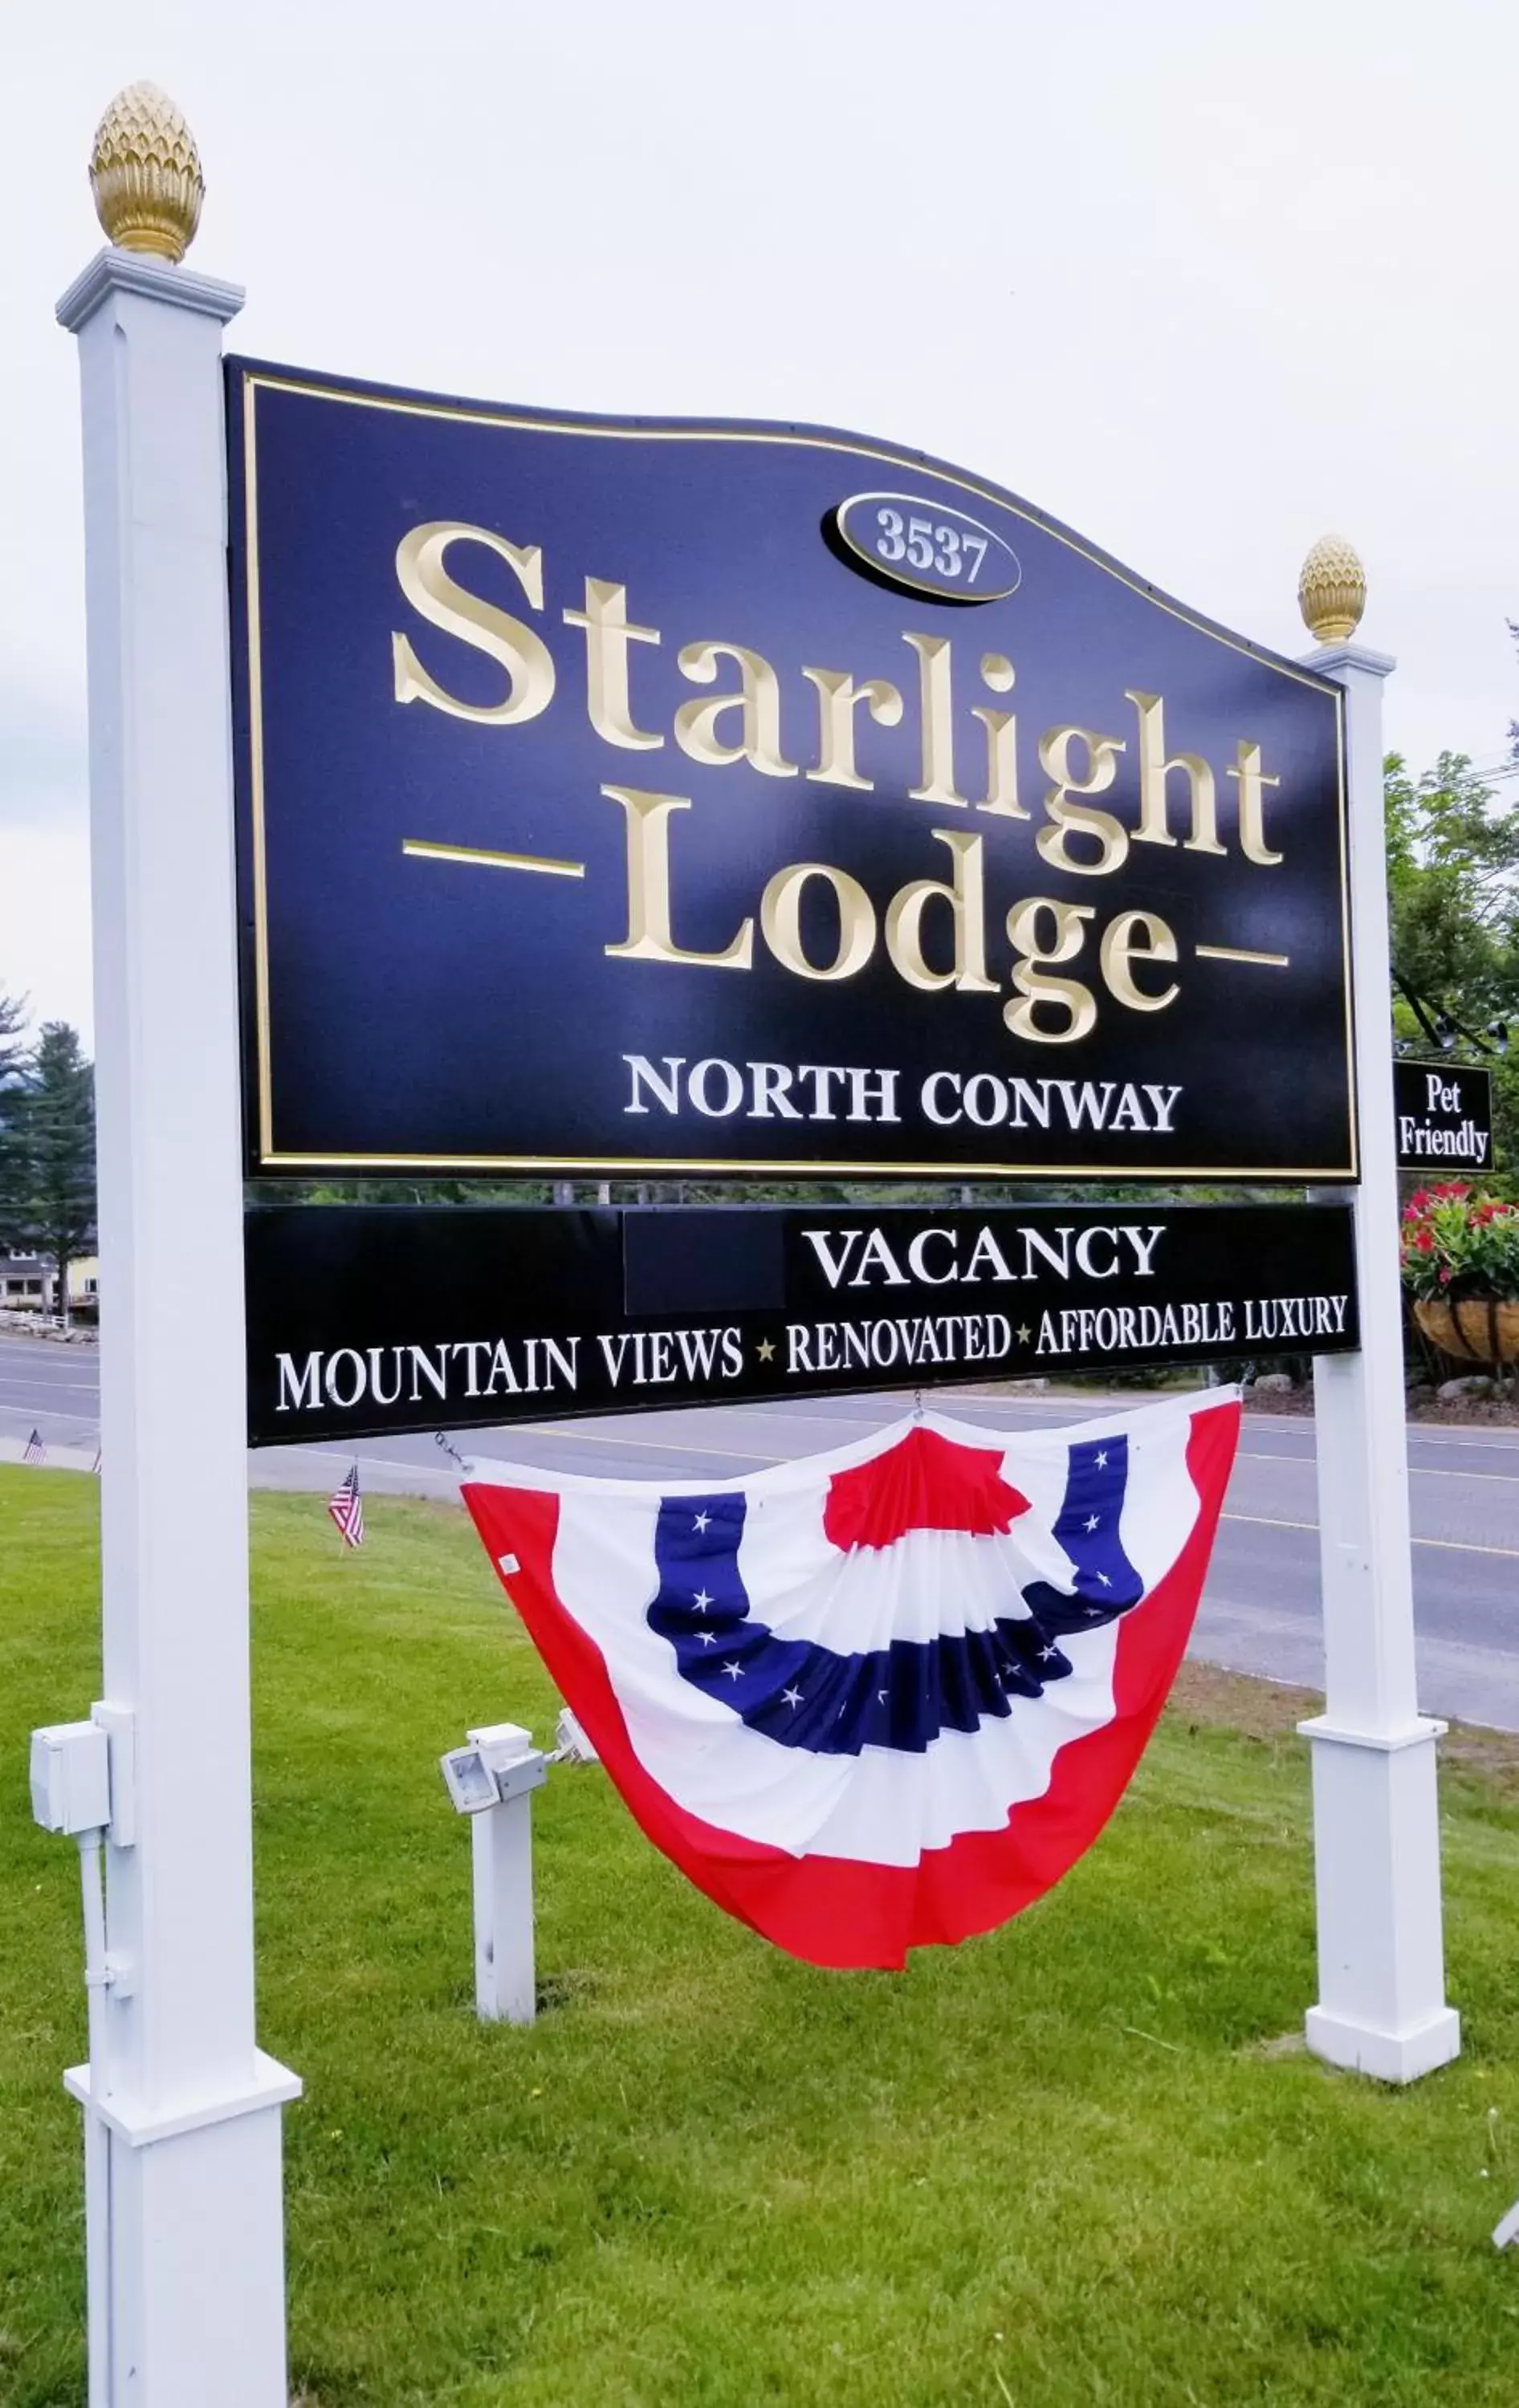 Property building in Starlight Lodge North Conway